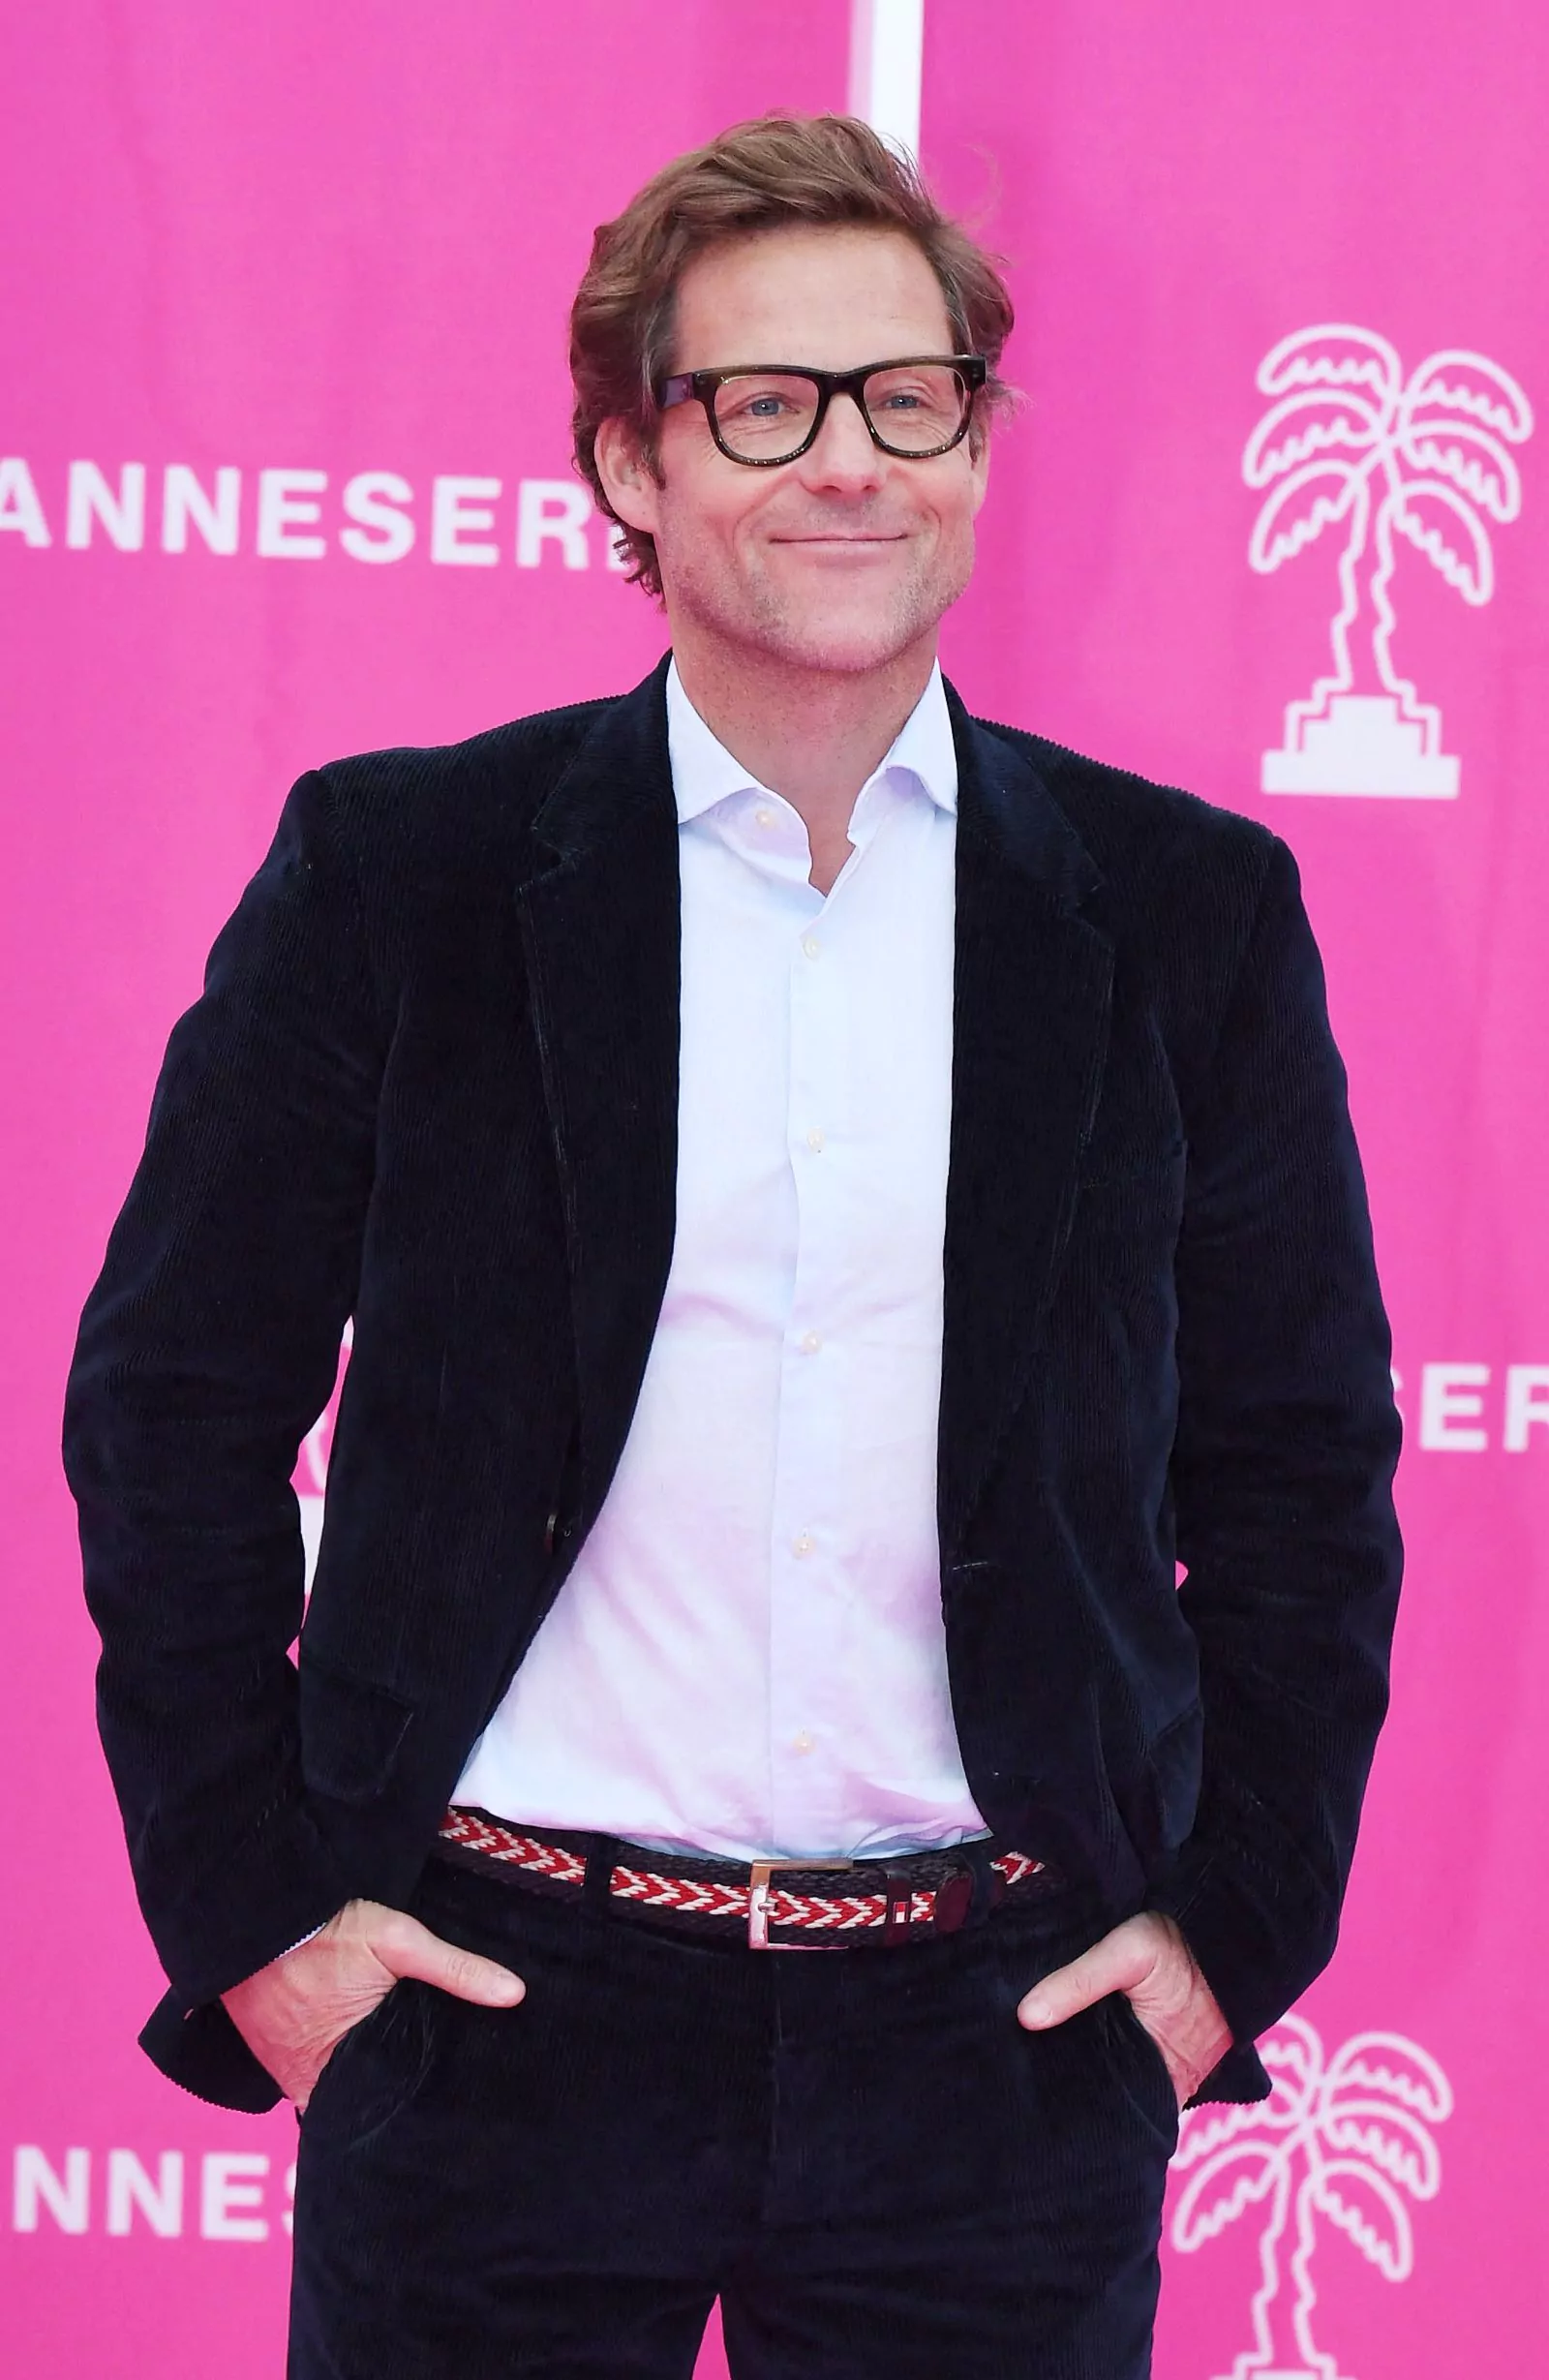 Jamie Bamber at the 6th Canneseries 2023 International Film Festival in Cannes, April 14, 2023